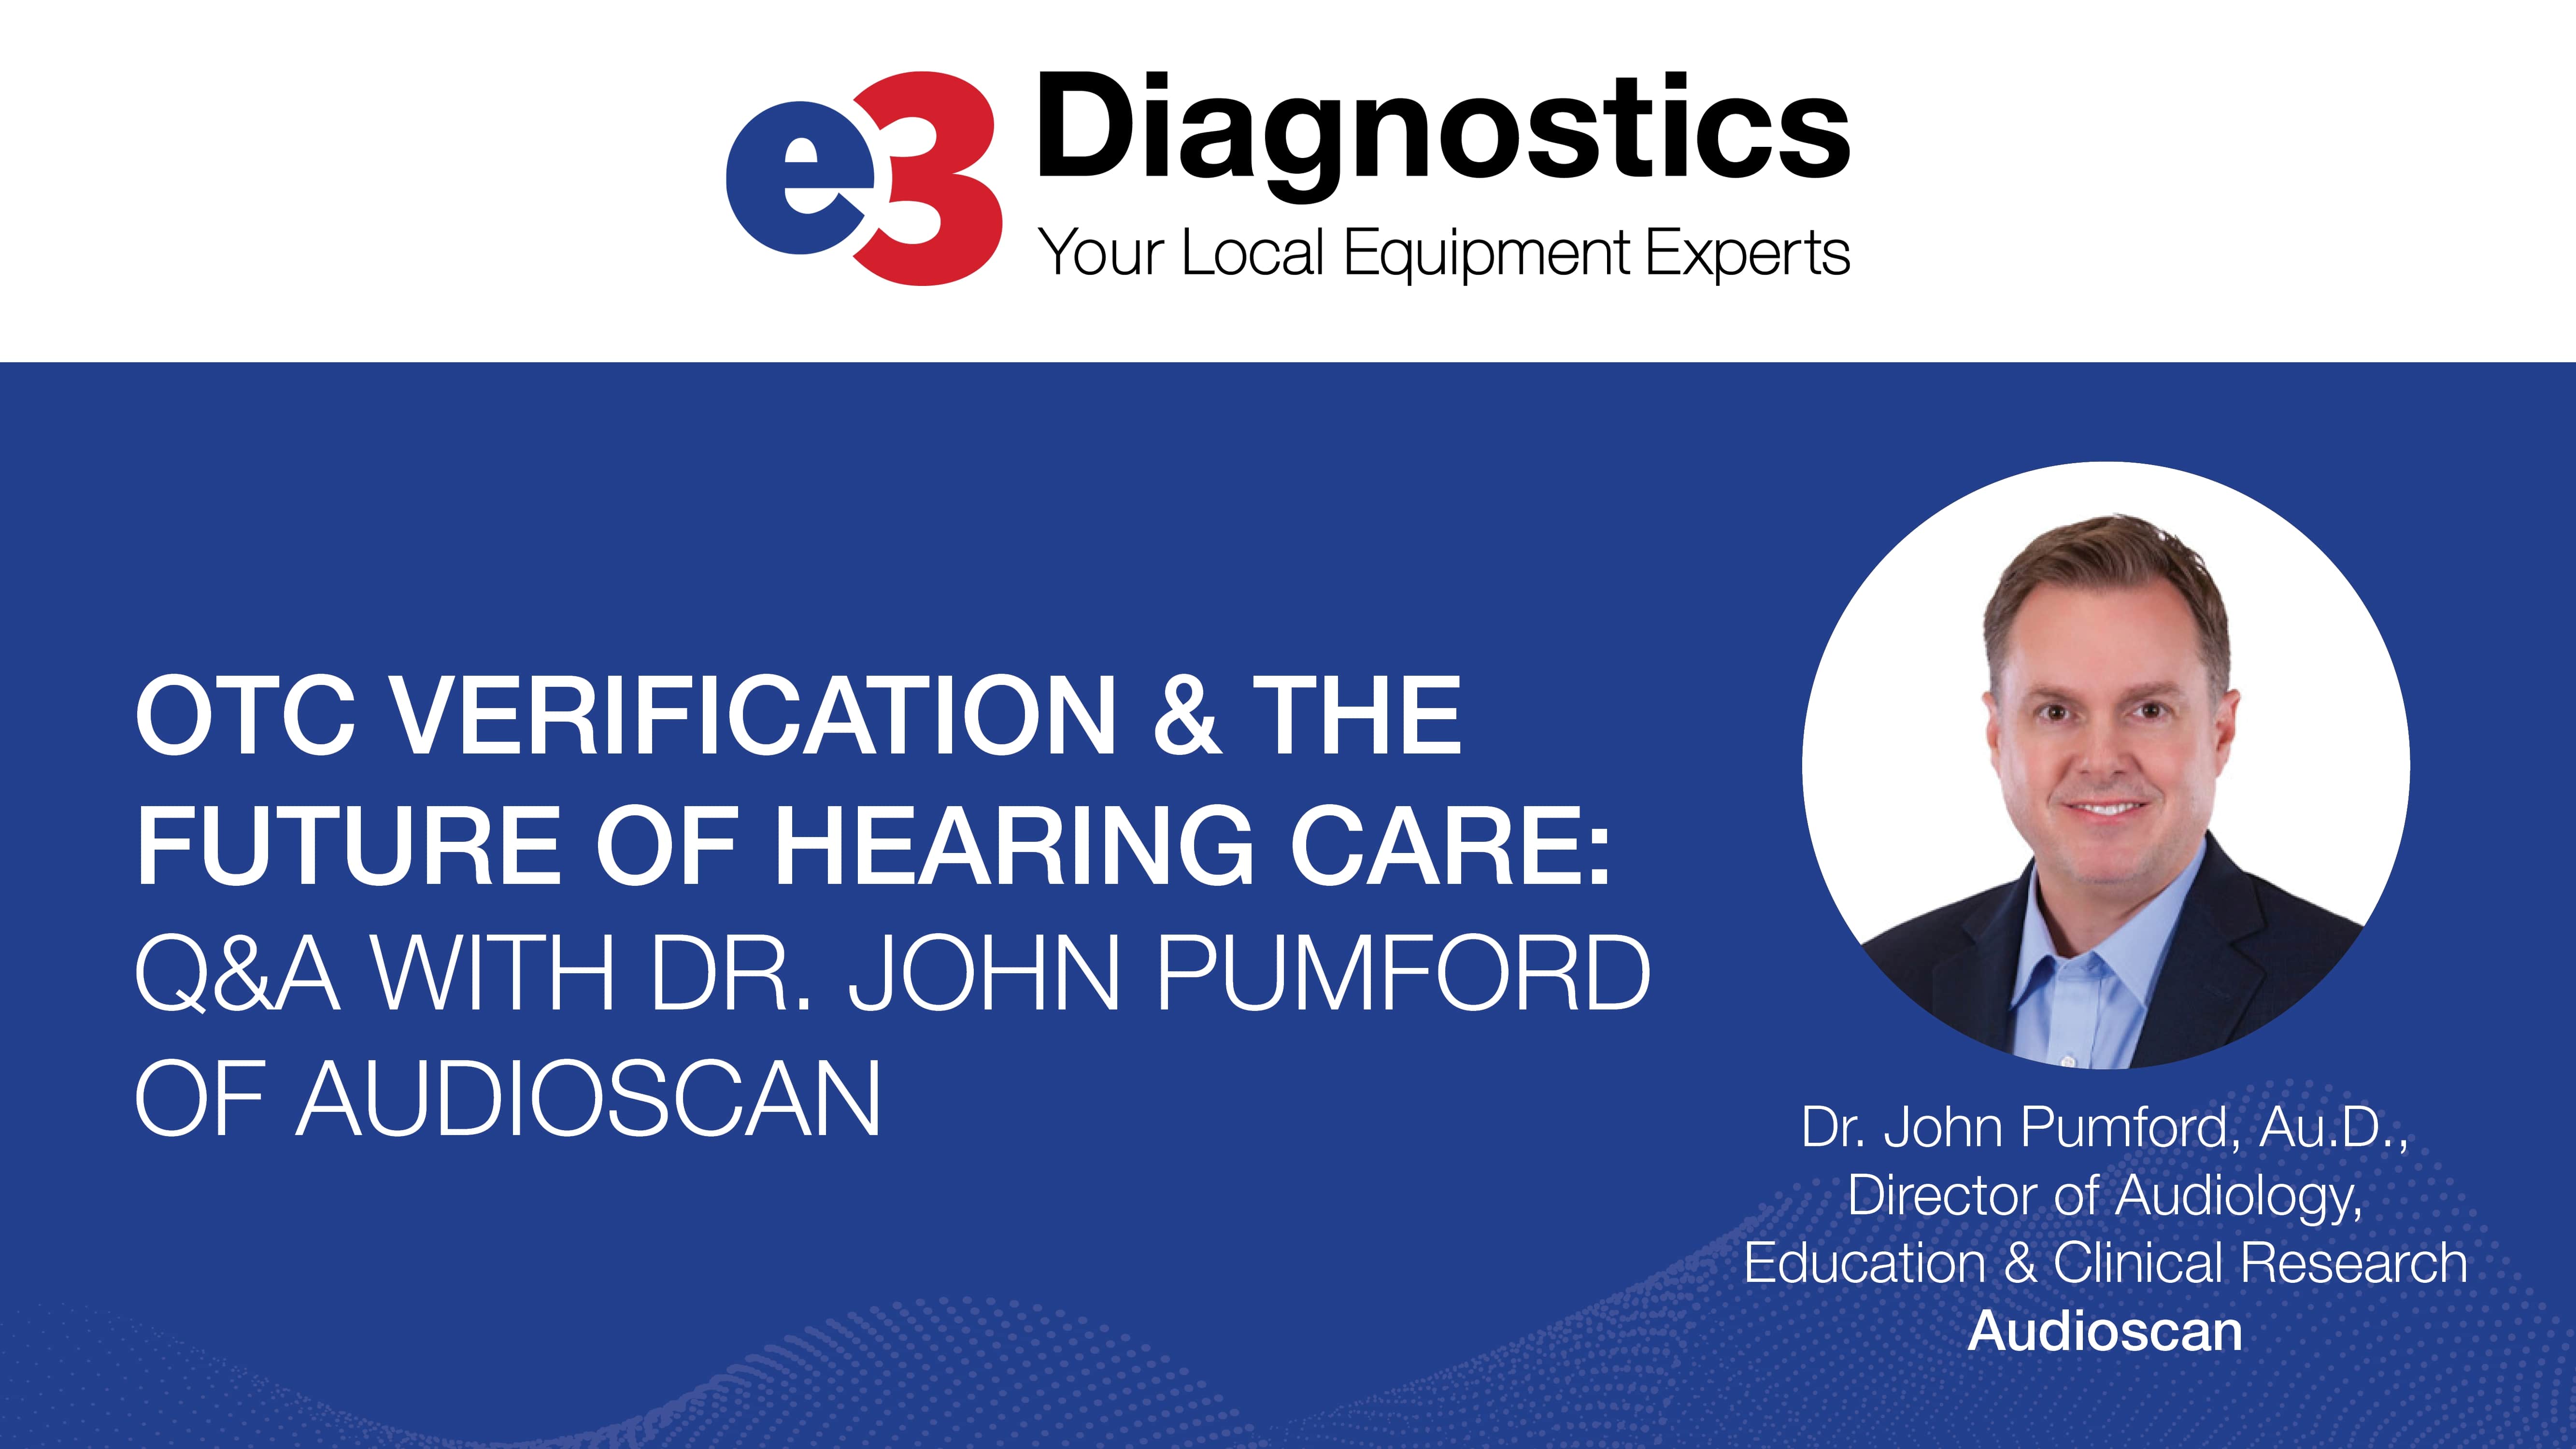 Featured image for “OTC Verification & The Future of Hearing Care: Q&A with Dr. John Pumford of Audioscan”